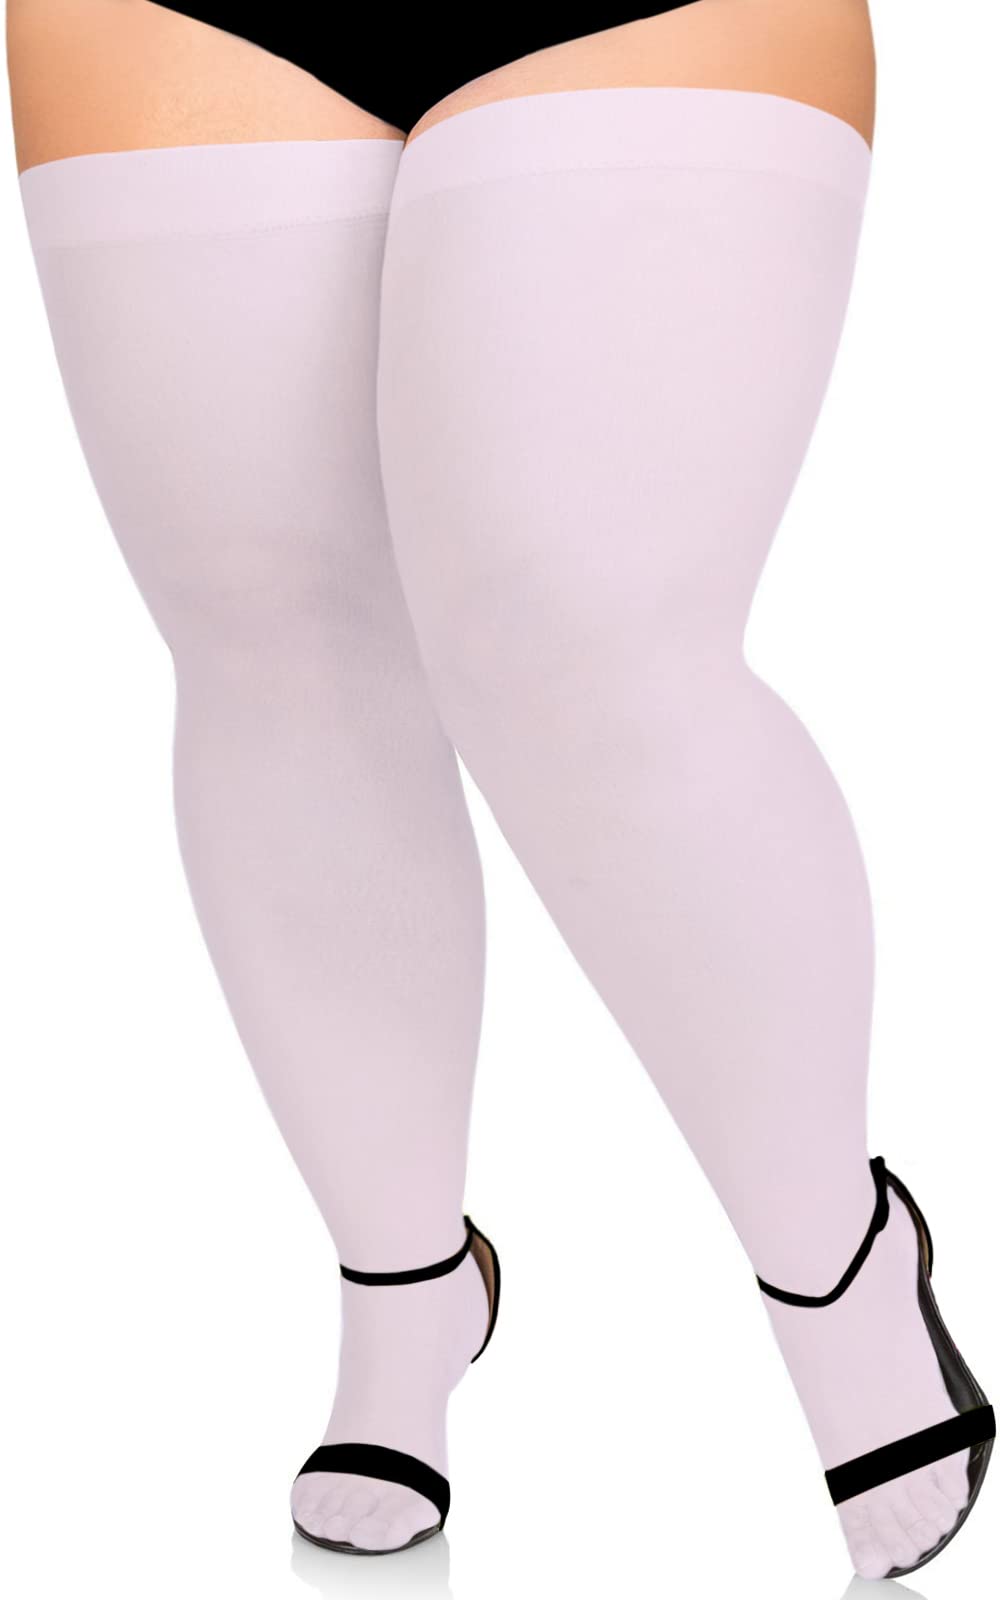 Extra Long Womens Opaque Over Knee High Stockings-White - Moon Wood